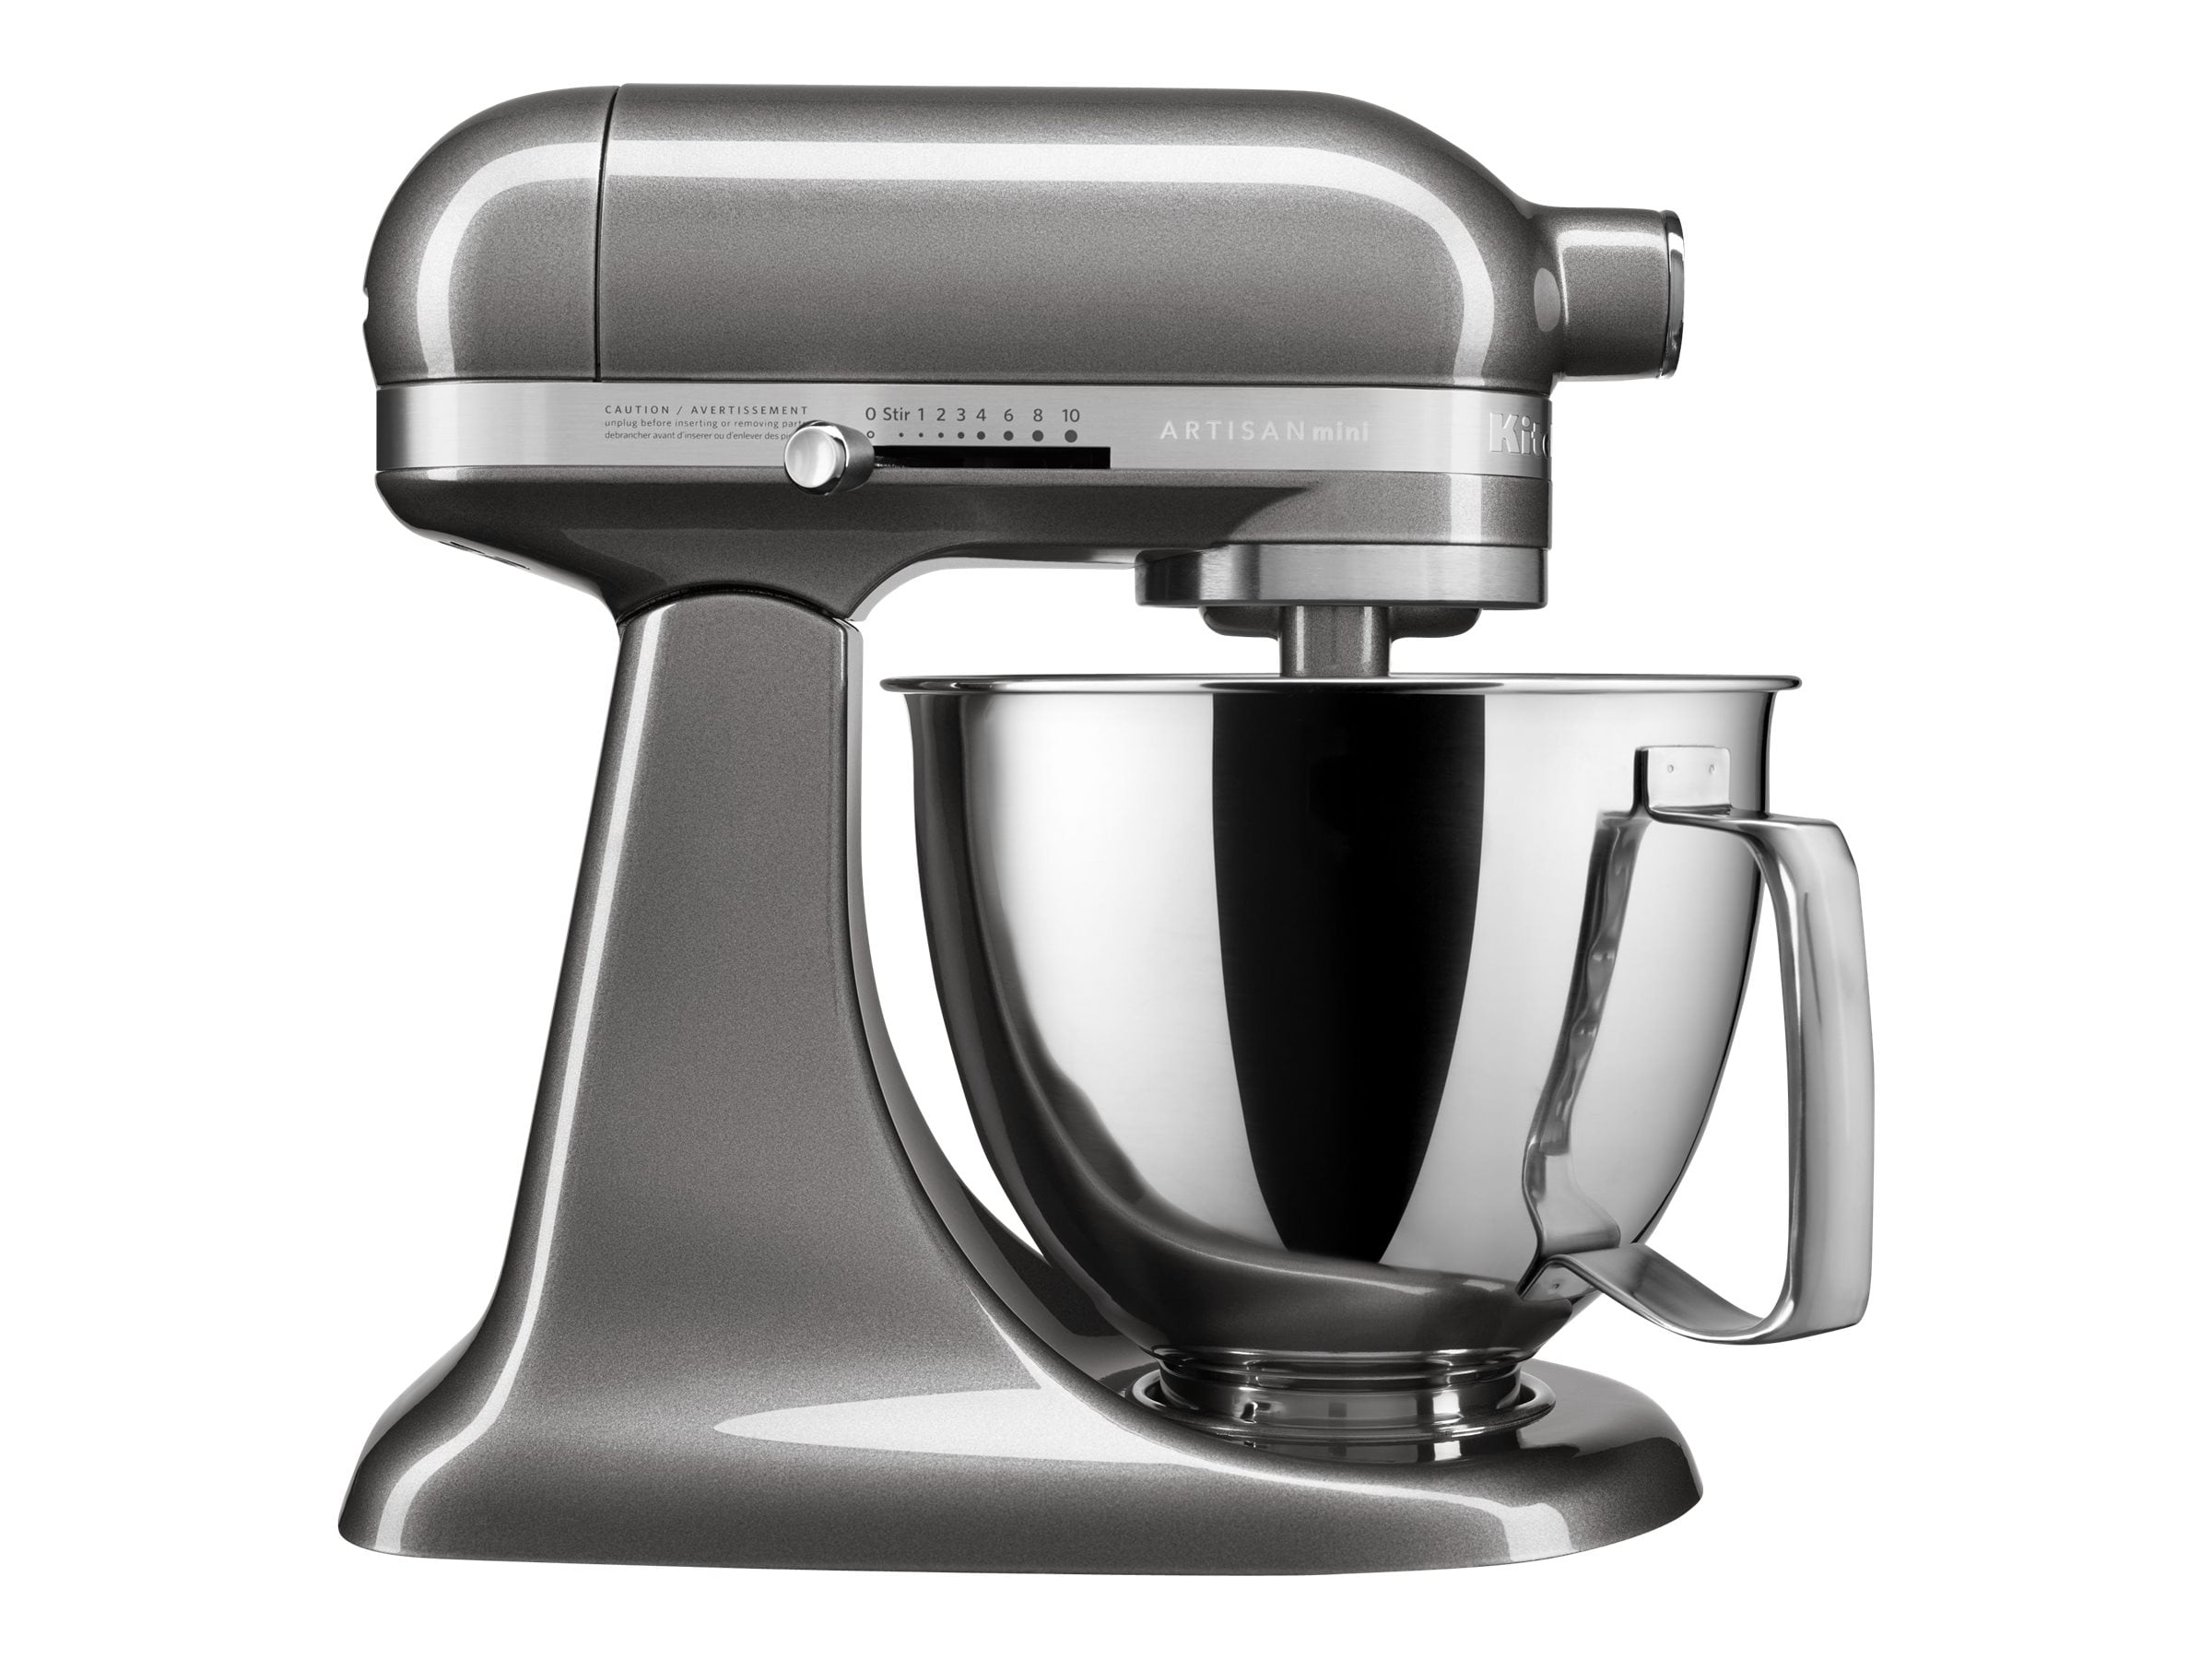 1000W BUILT-IN Universal Multi-Function Mixer Replaces KitchenAid & Other Stand 